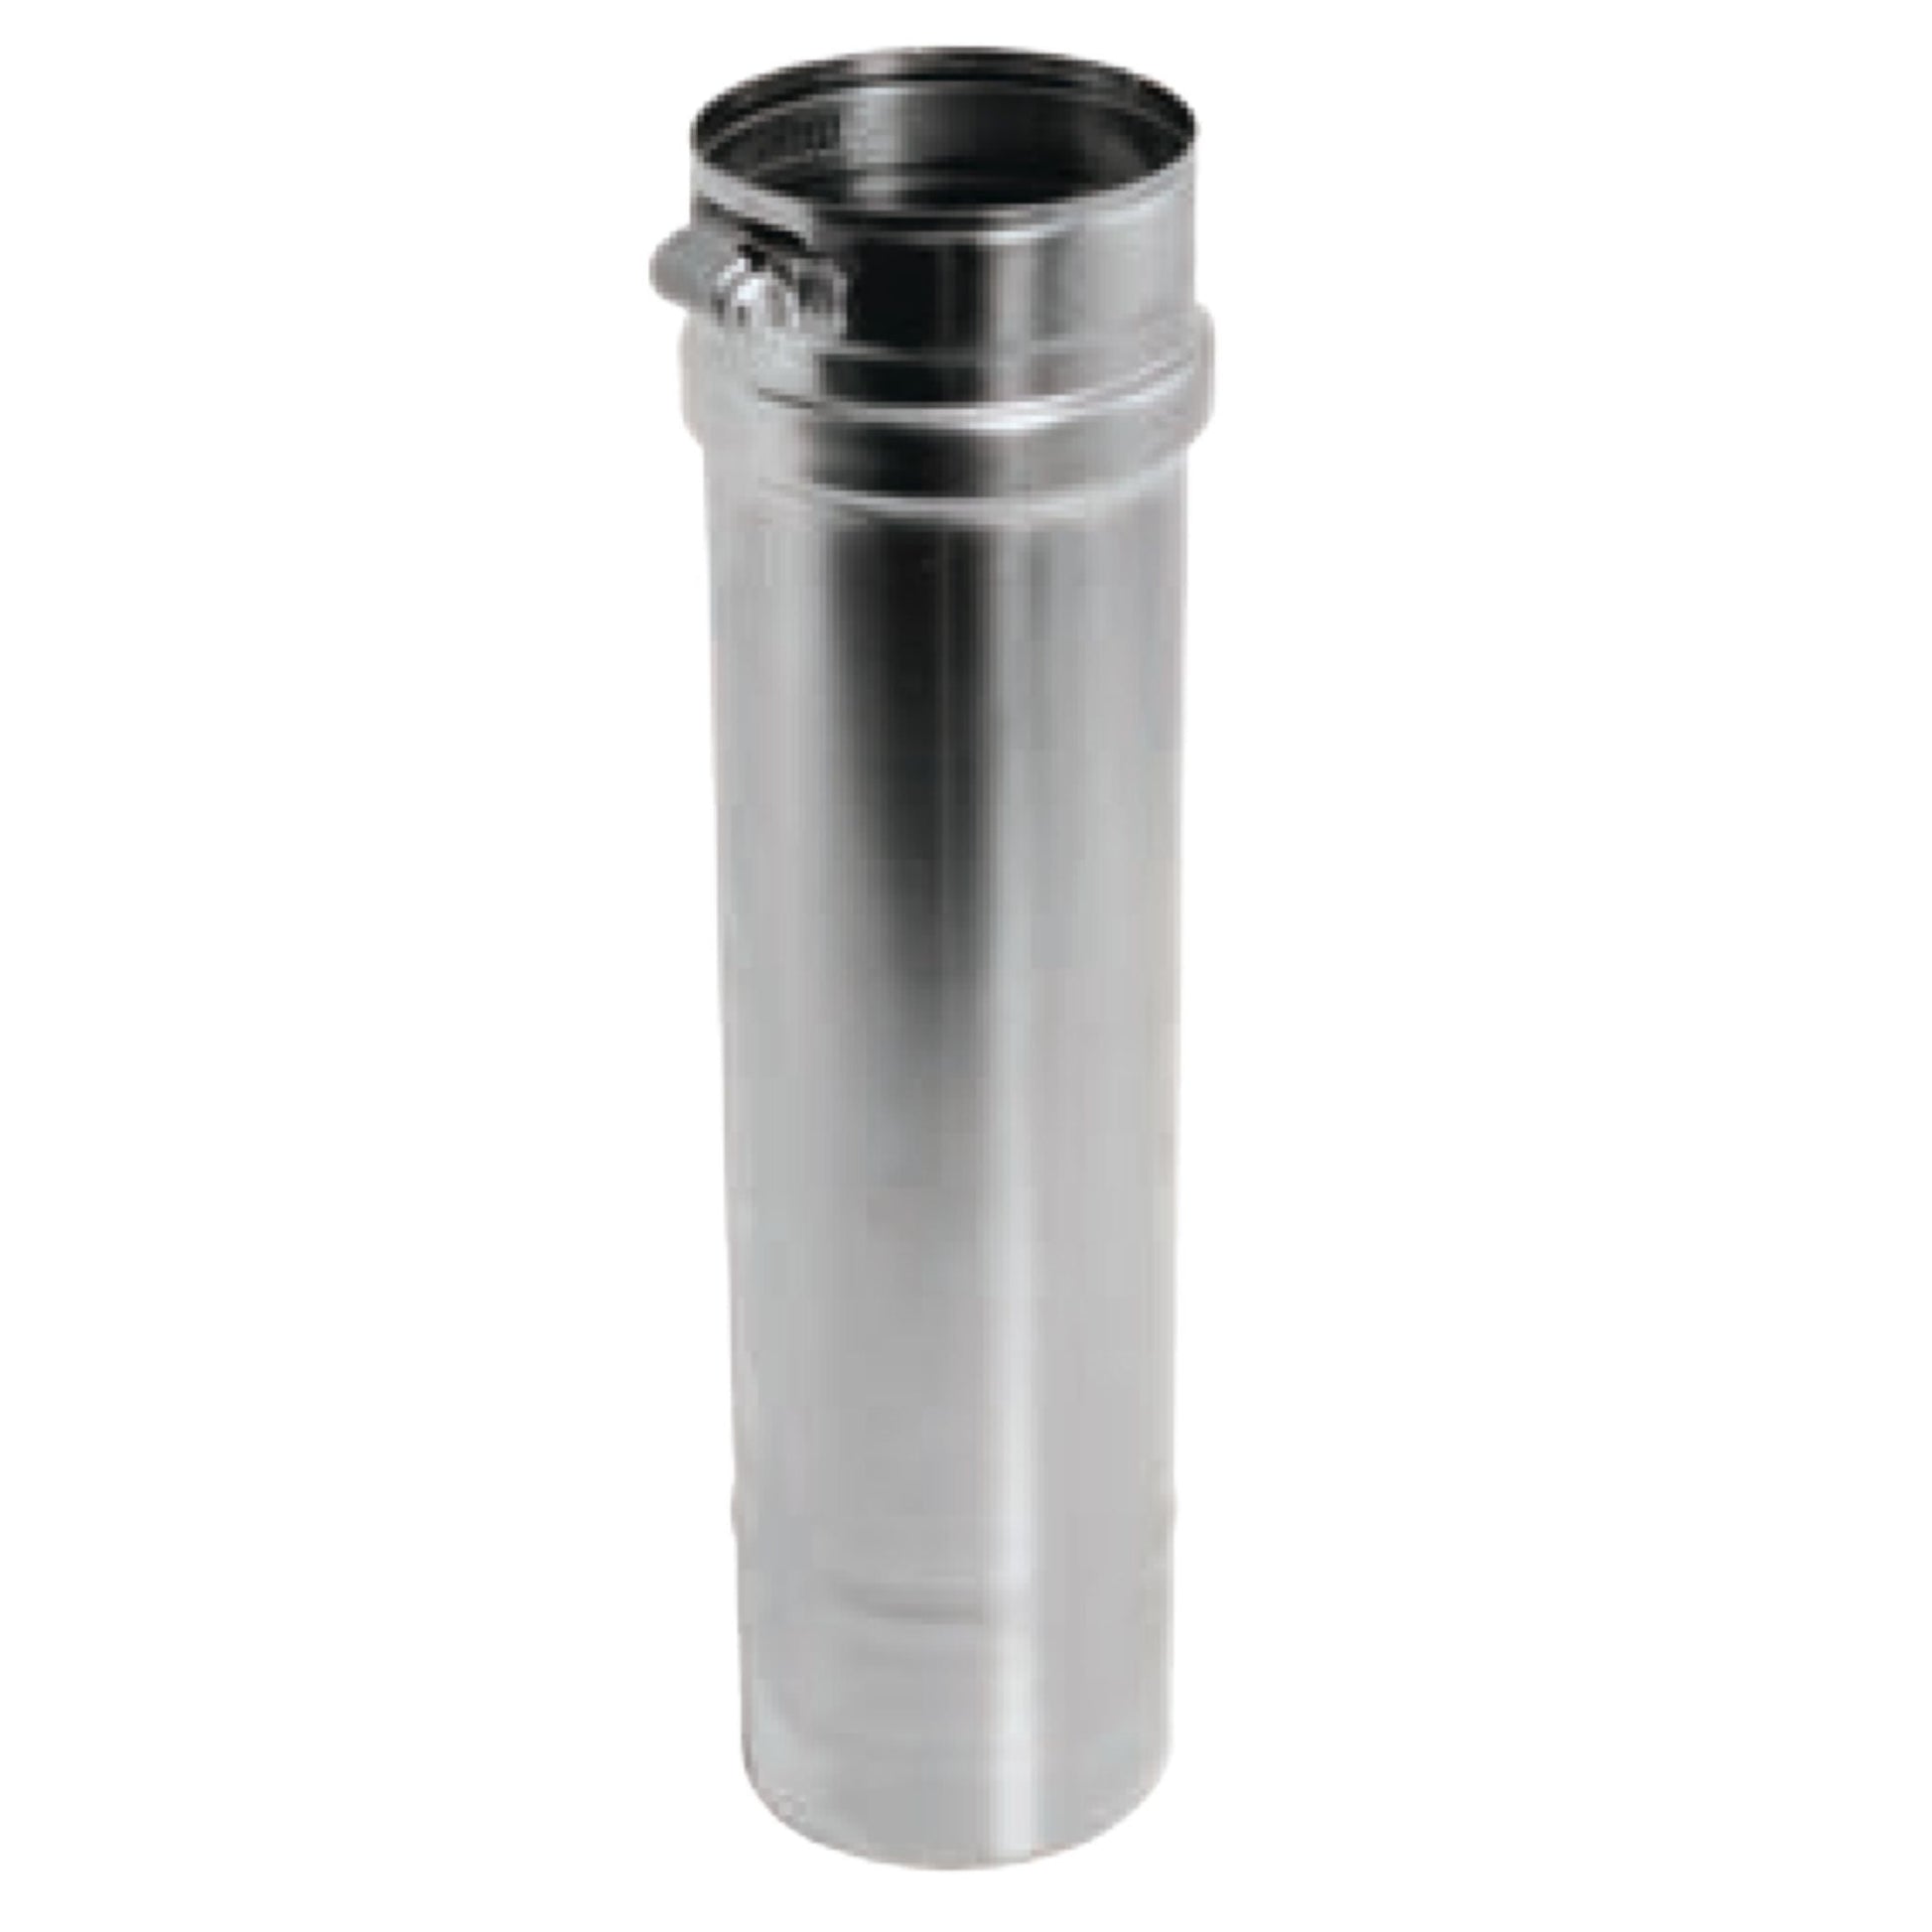 DuraVent FasNSeal 12" x 18" 29-4C Stainless Steel Vent Length